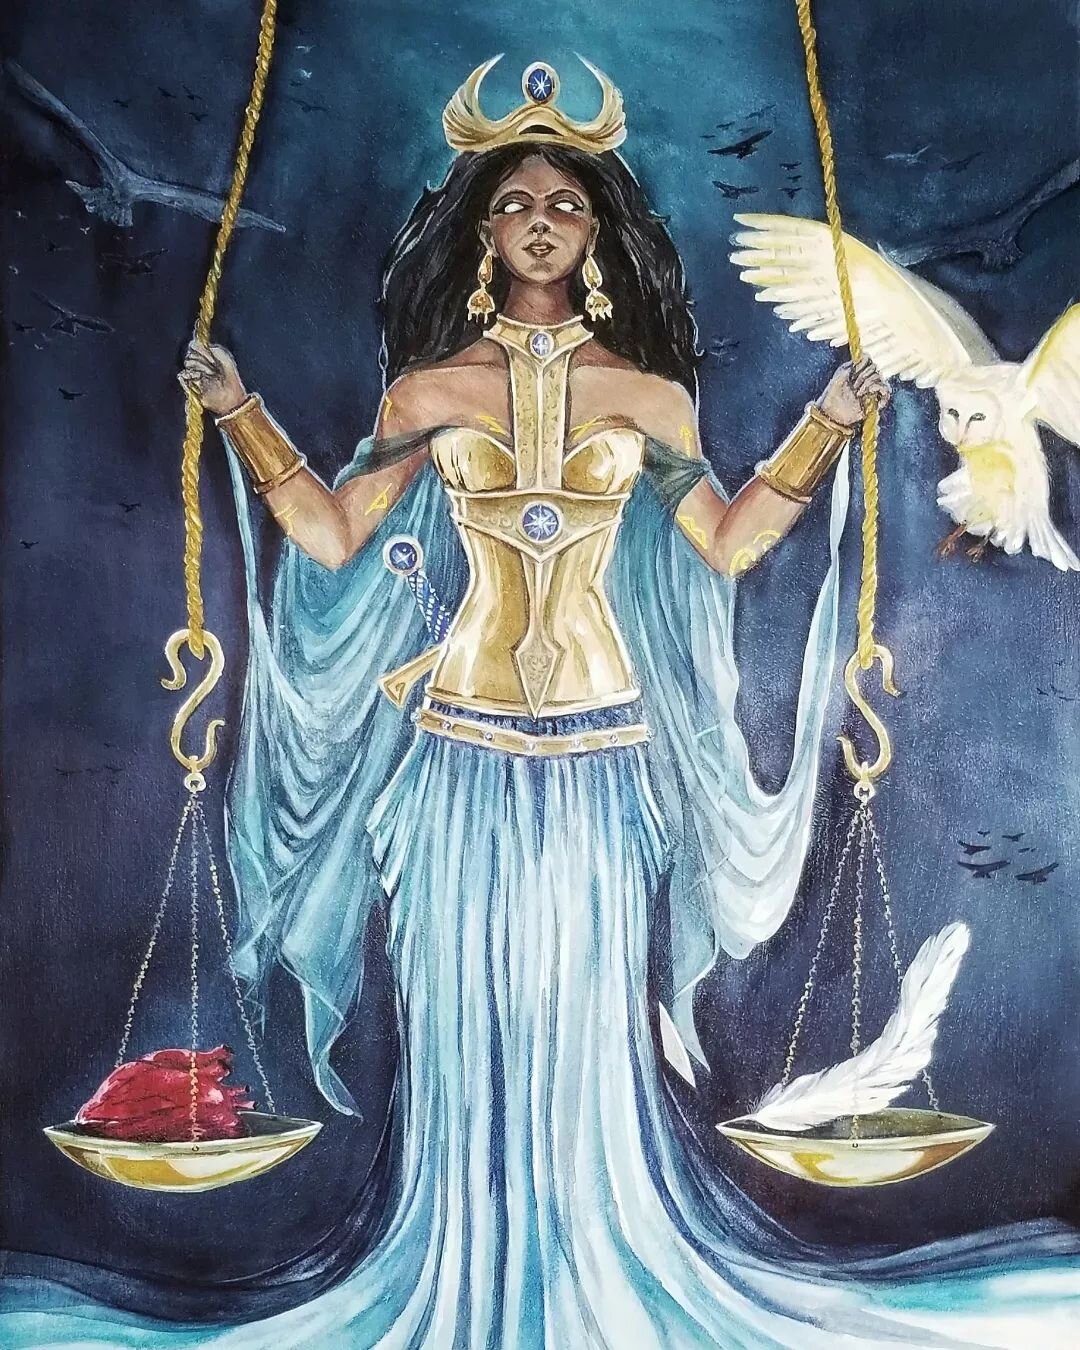 Here's a little peek at my painting process from beginning to end, in the creation of the &quot;Justice&quot;card for the ETA Tarot deck 2024!

This piece is painted on craddled panel provided by @apollongotrick

#tarotart #tarotcard #tarotcardart #j